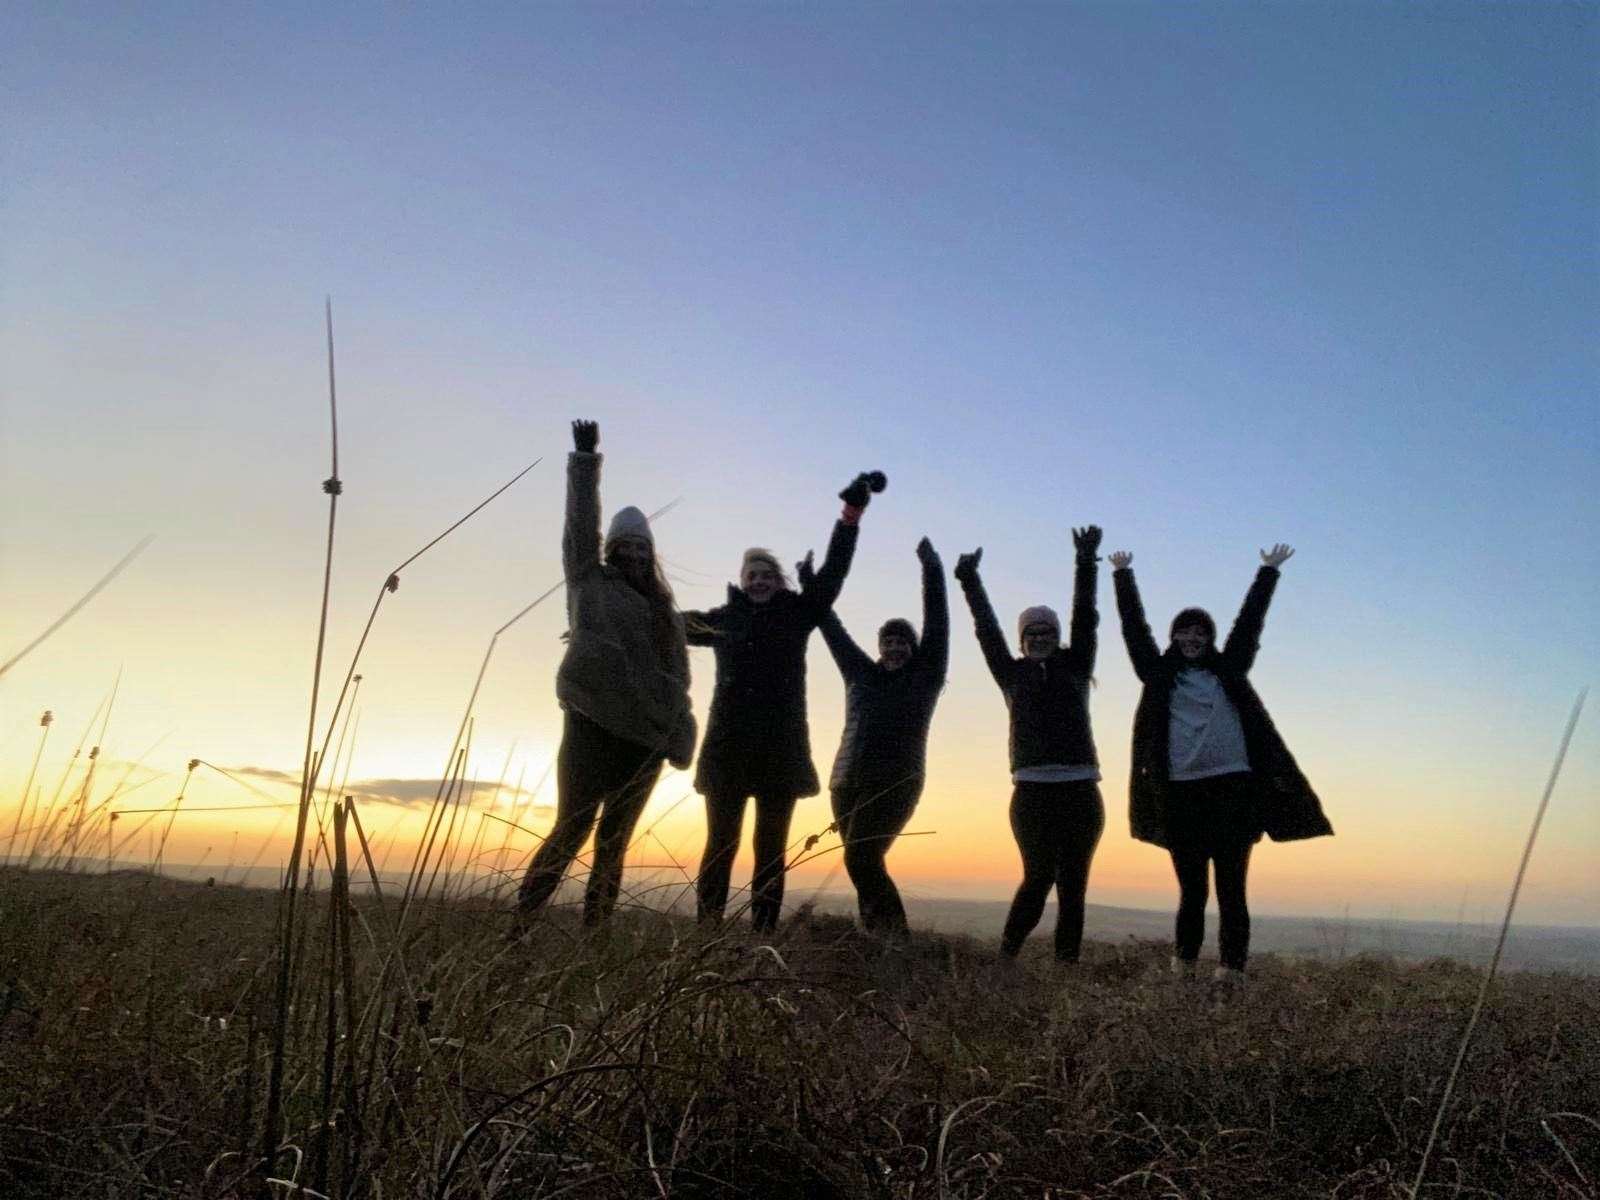 Five members of the group – Marie MacKillop, Jo-Anne Anderson, Fiona Sutherland, Kirsty Sutherland and Lauren McWilliam – took part in an early morning sunrise walk at Ben Dorrery this month.